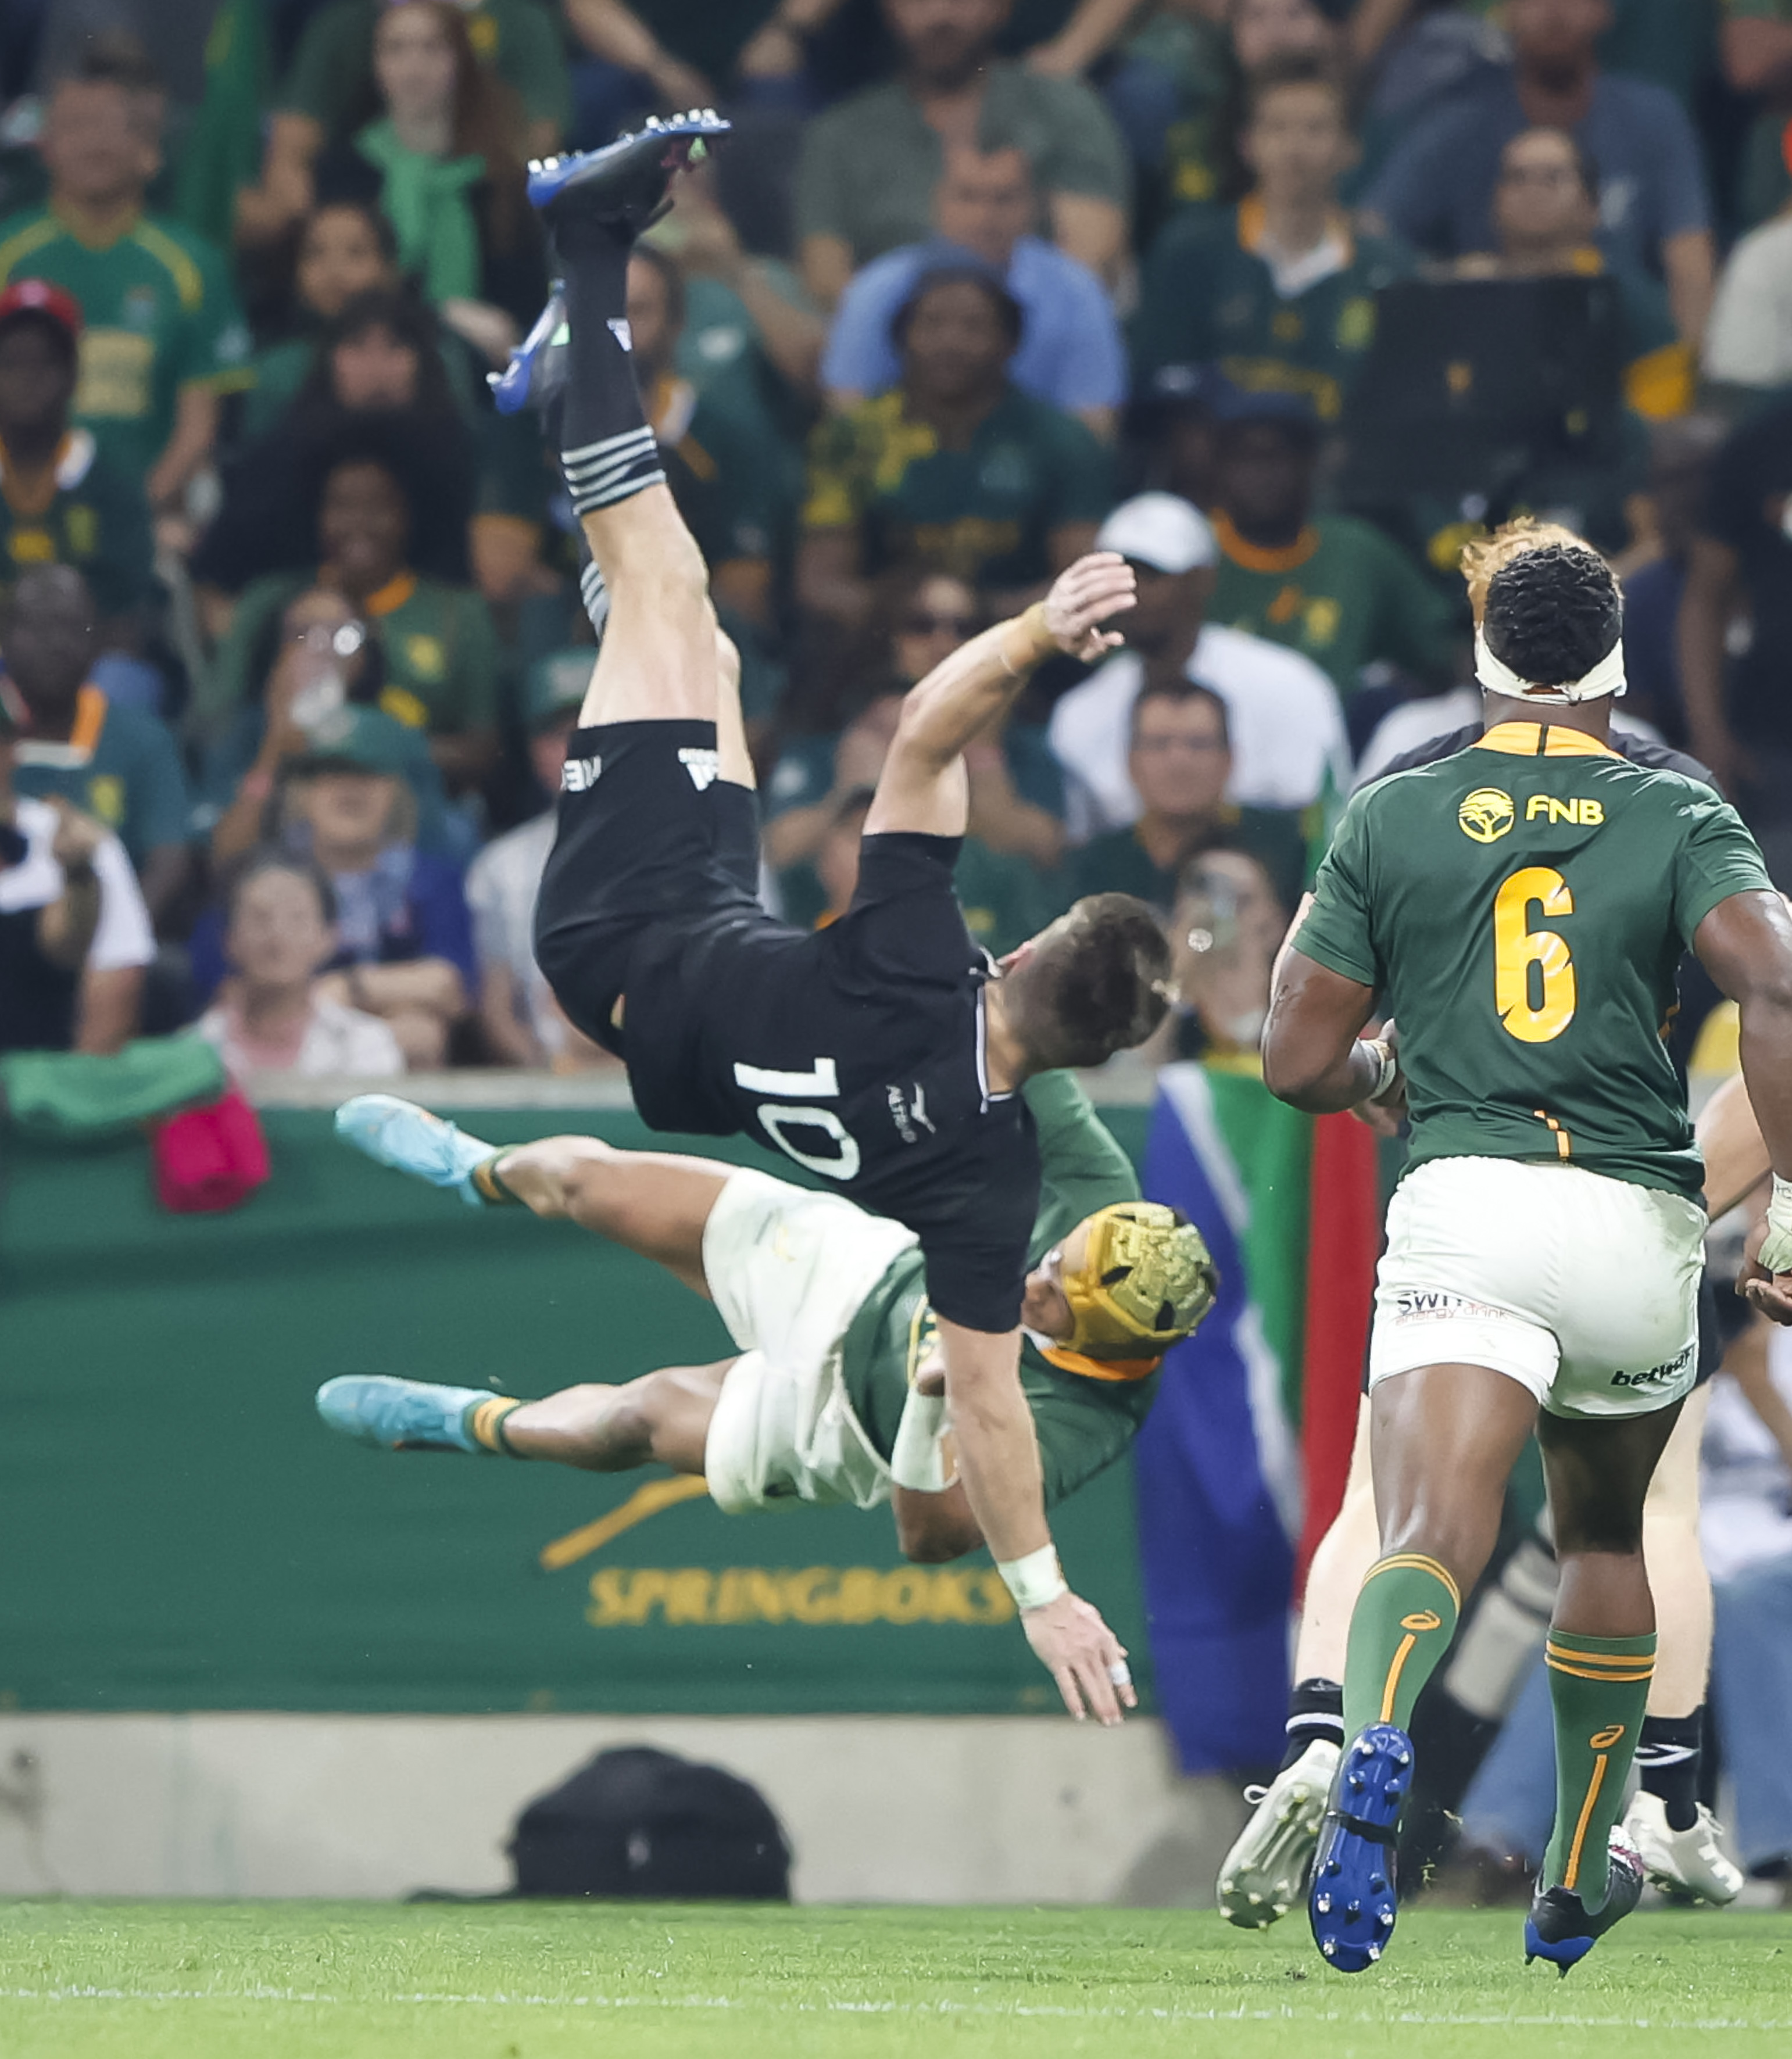 All Blacks beaten by Springboks as Ian Foster fights for the job